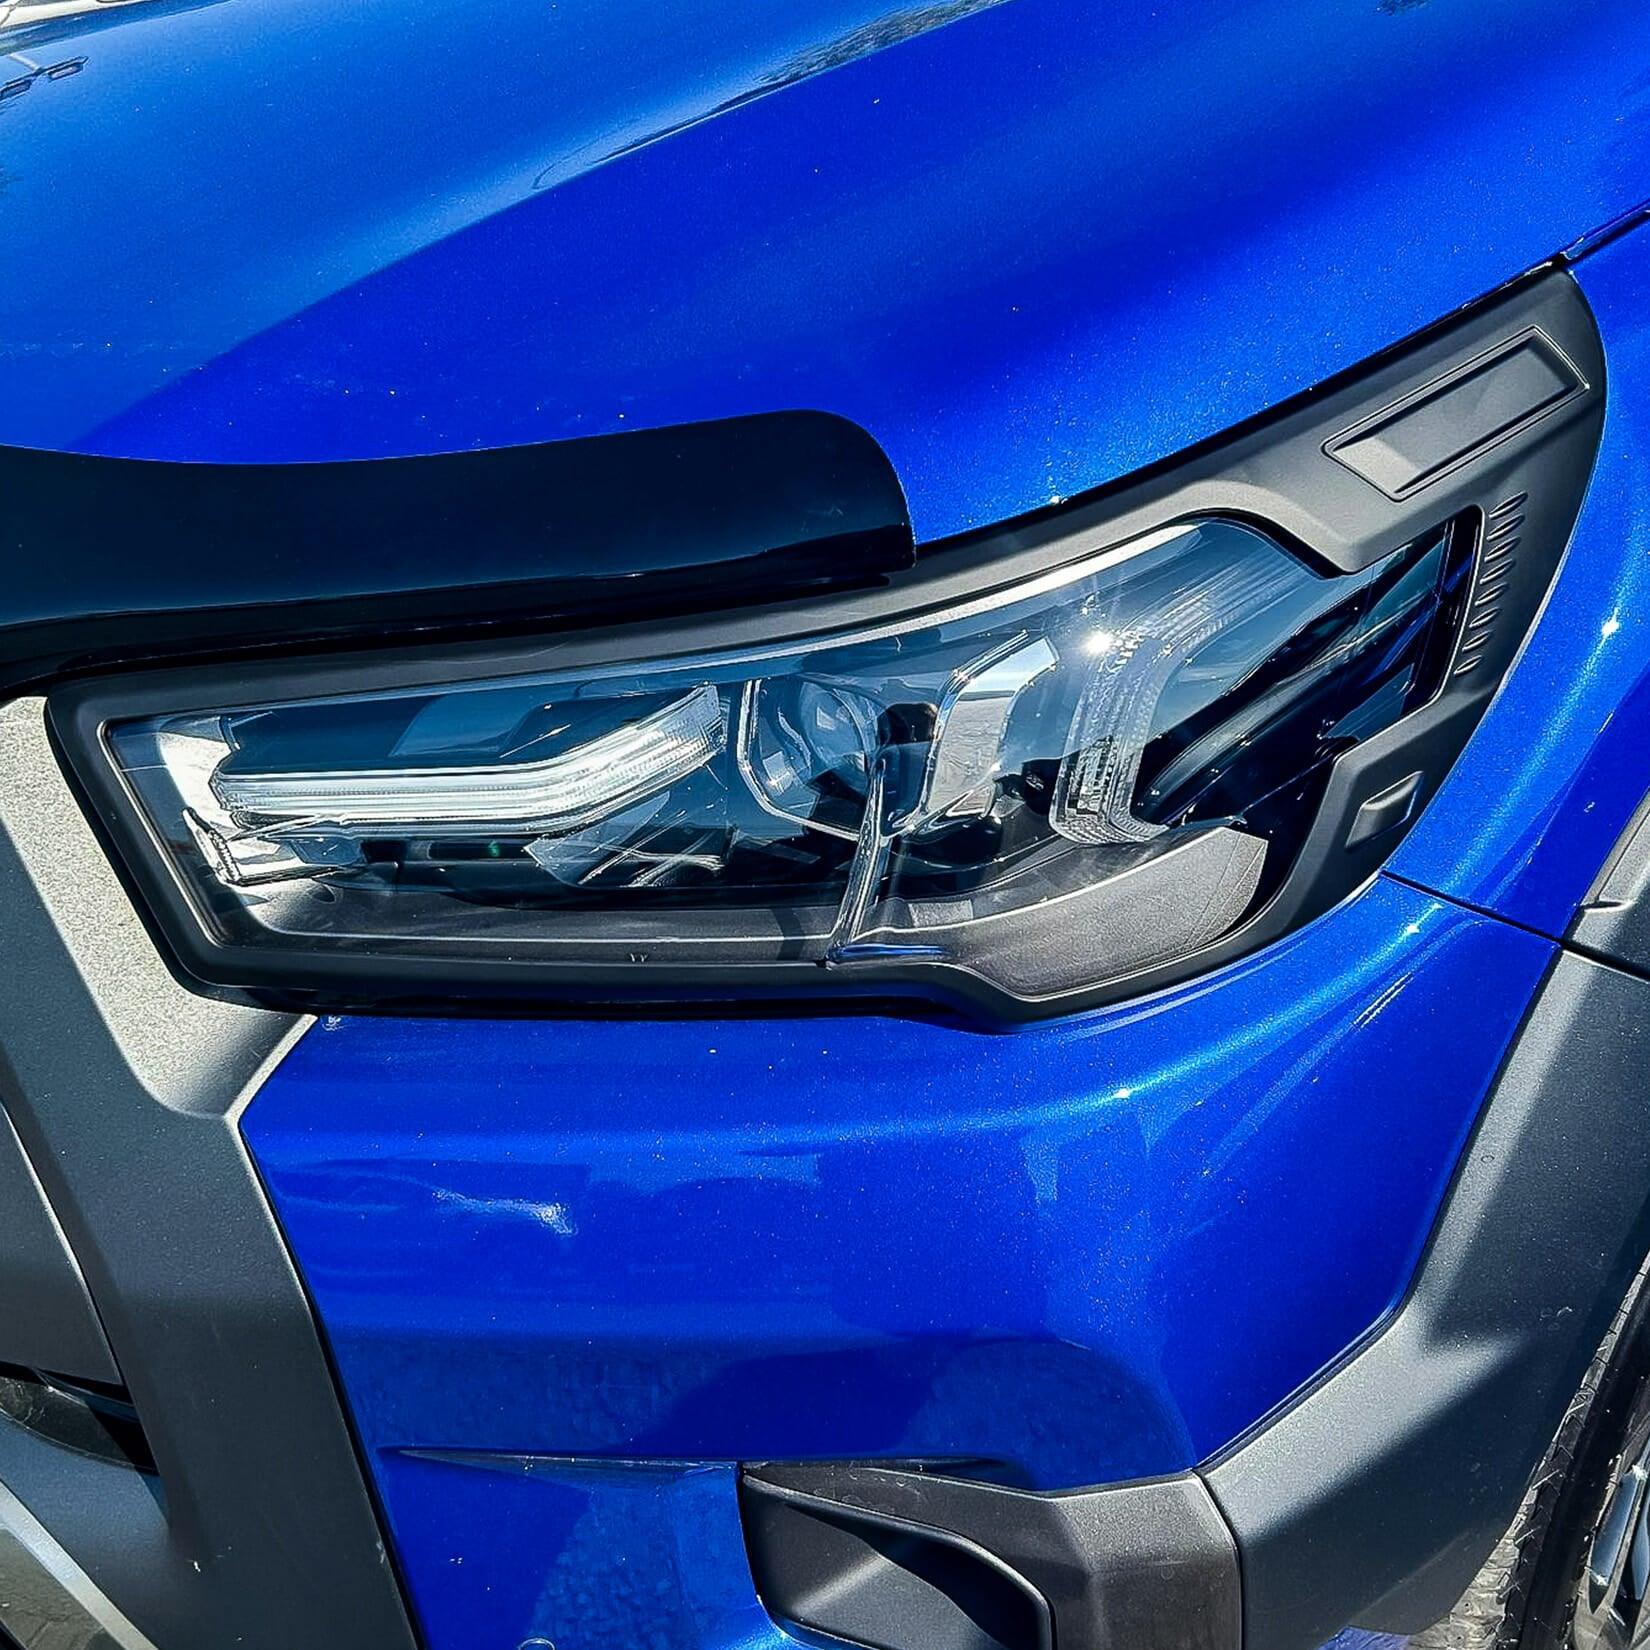 TOYOTA HILUX 2021 ON STX HEAD LIGHT GUARDS - IN MATTE BLACK - PAIR - Invincible & X - Storm Xccessories2